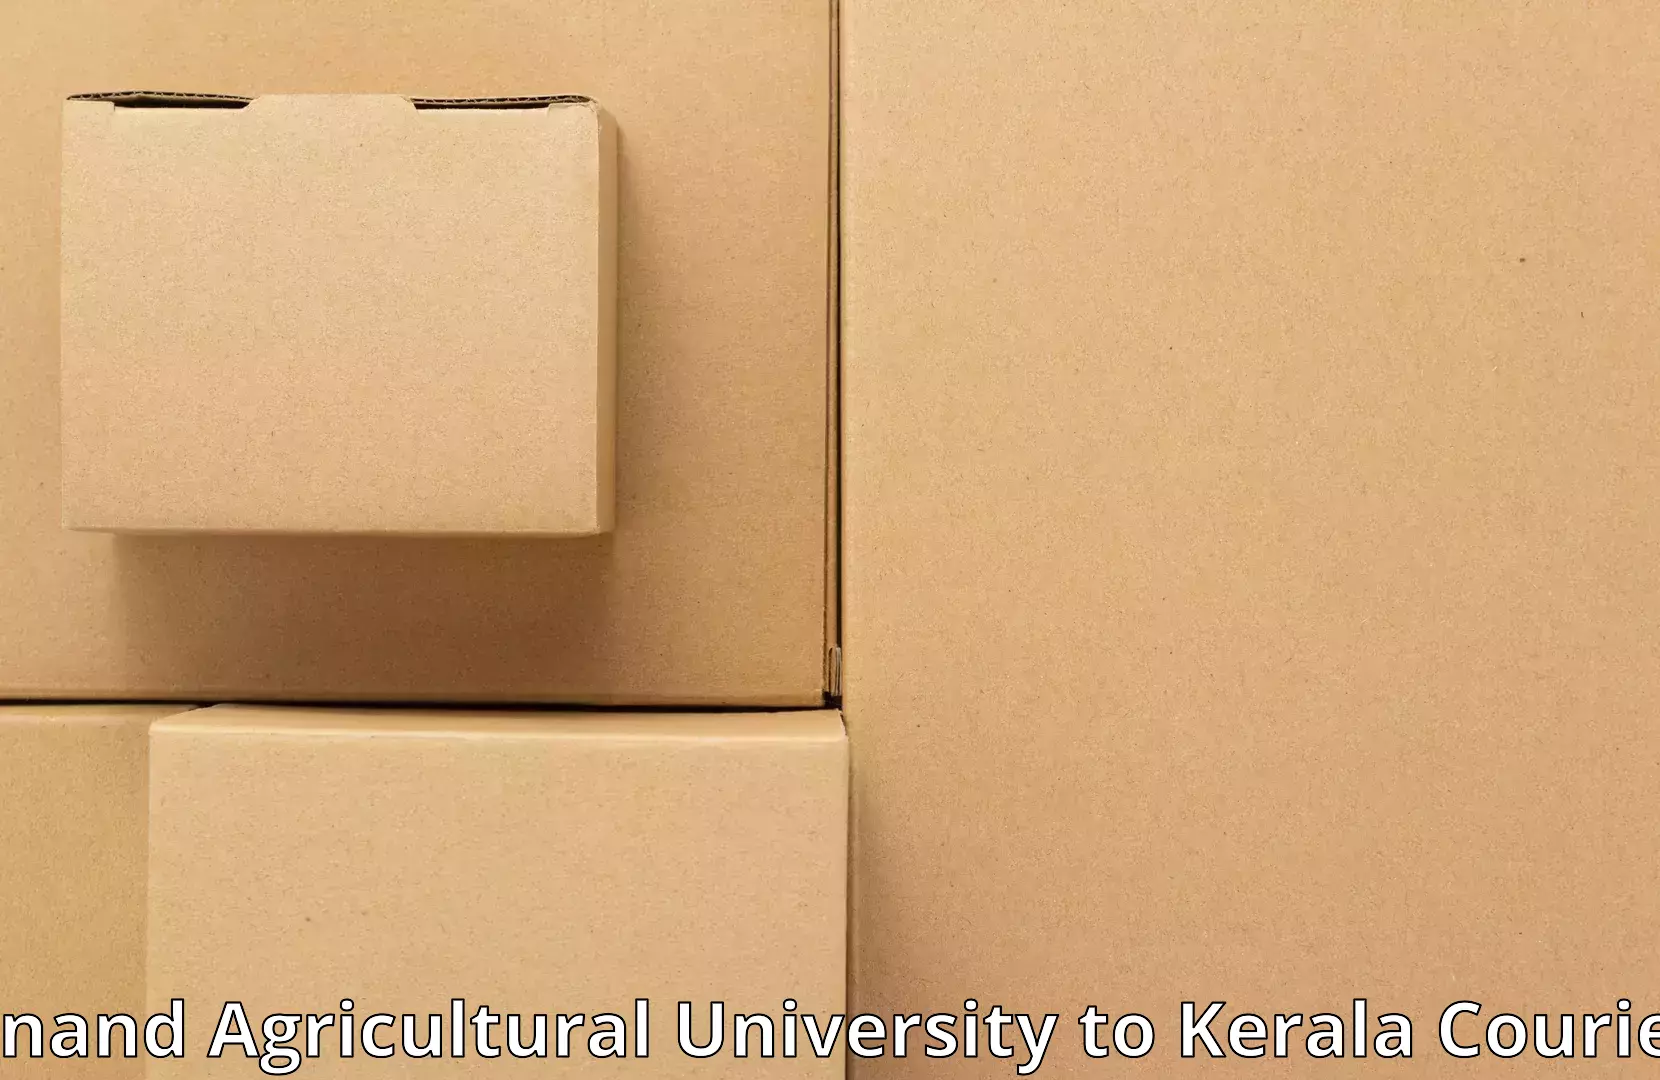 Trusted furniture movers Anand Agricultural University to Kerala